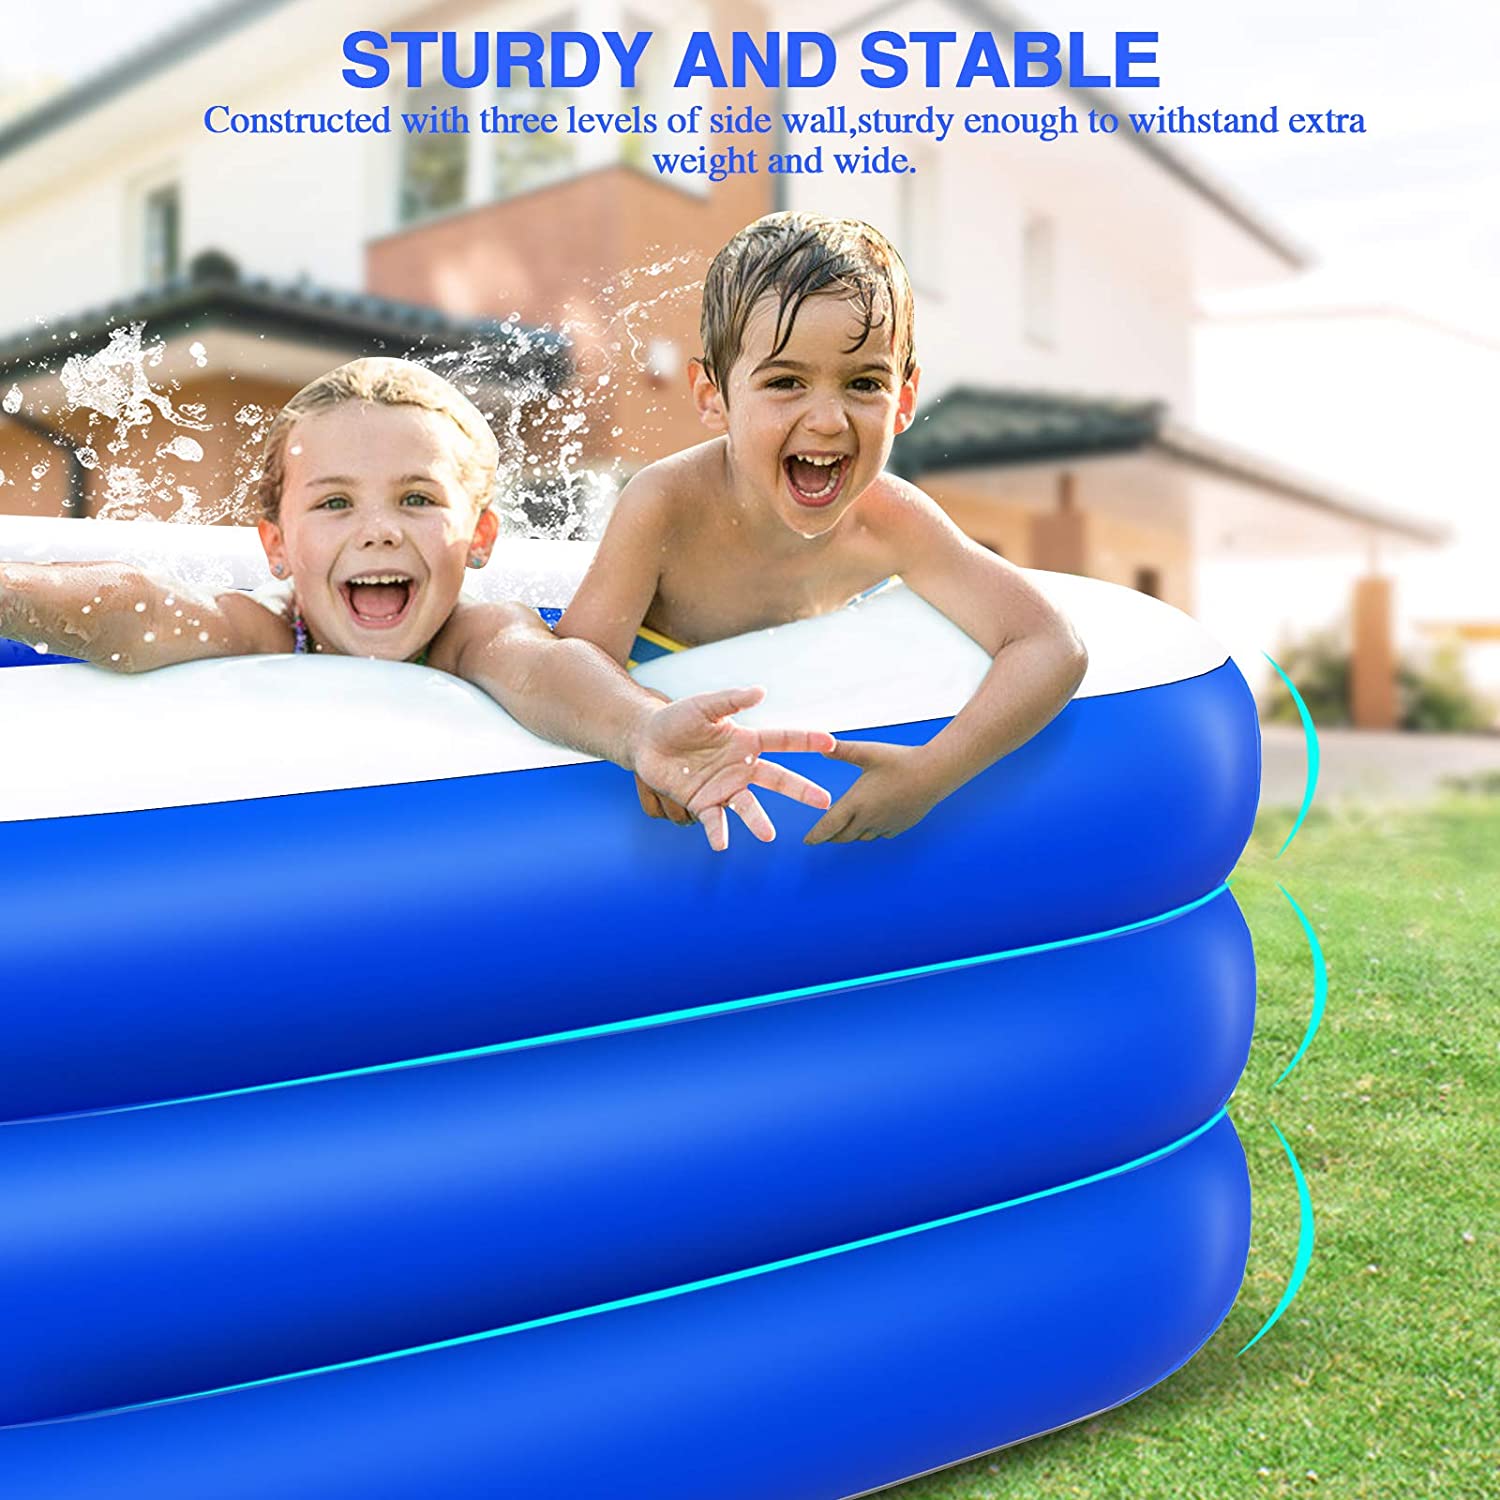 Discount Promotion Inflatable Foldable Pool Accessories Inflatable Swim Pool Inflatable Swimming Pool